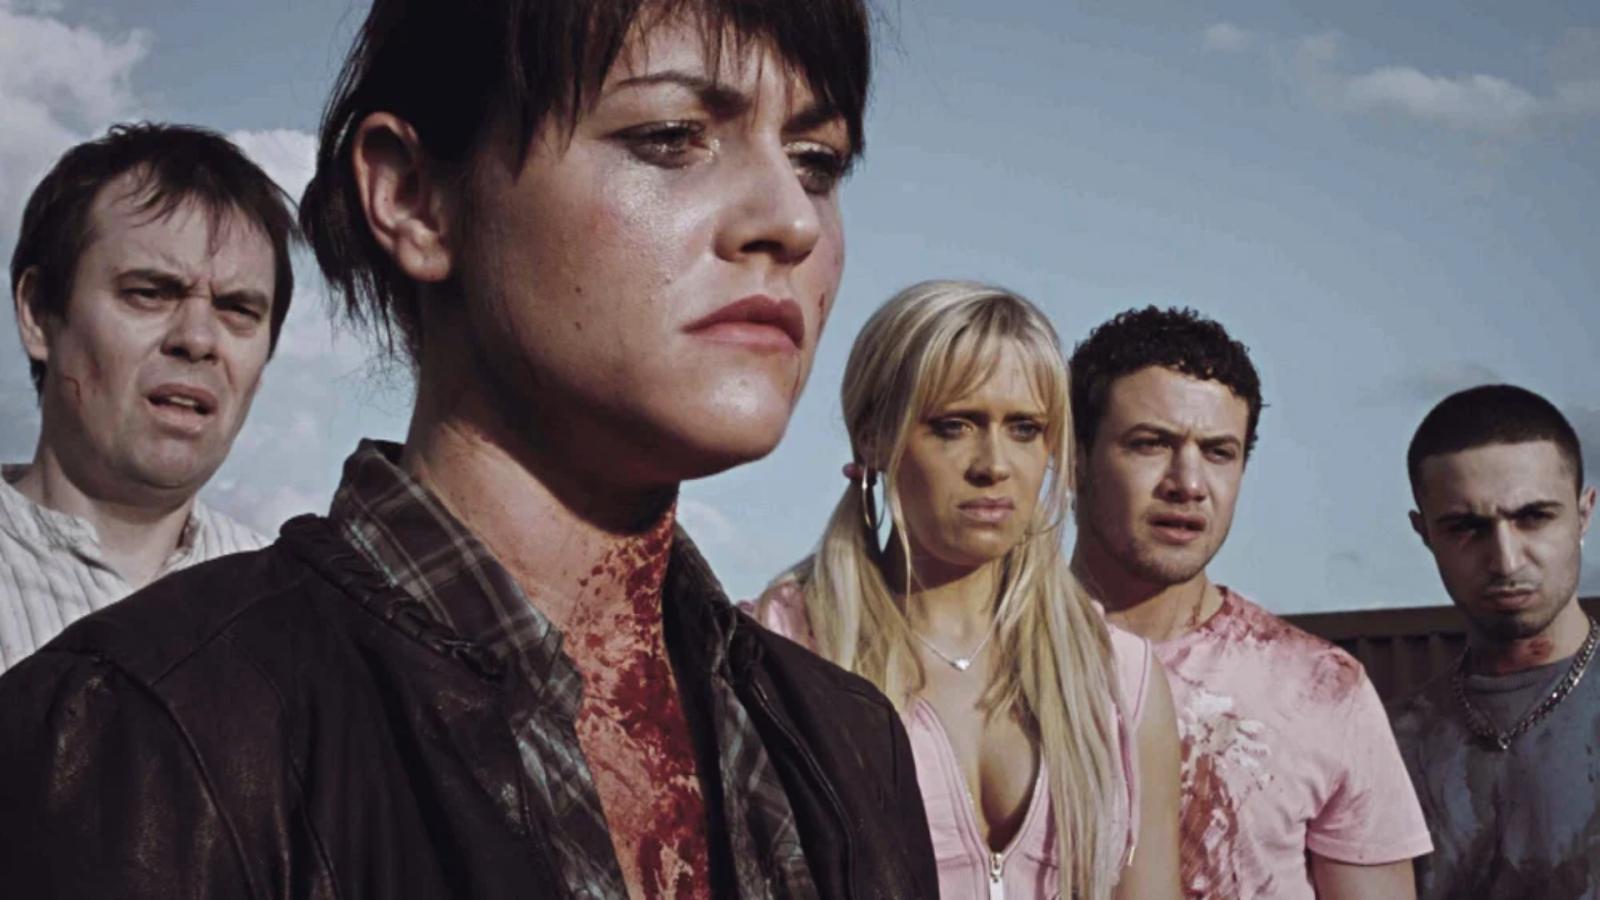 15 Must-Watch Mini-Series That Are Better Than Most TV Shows - image 4